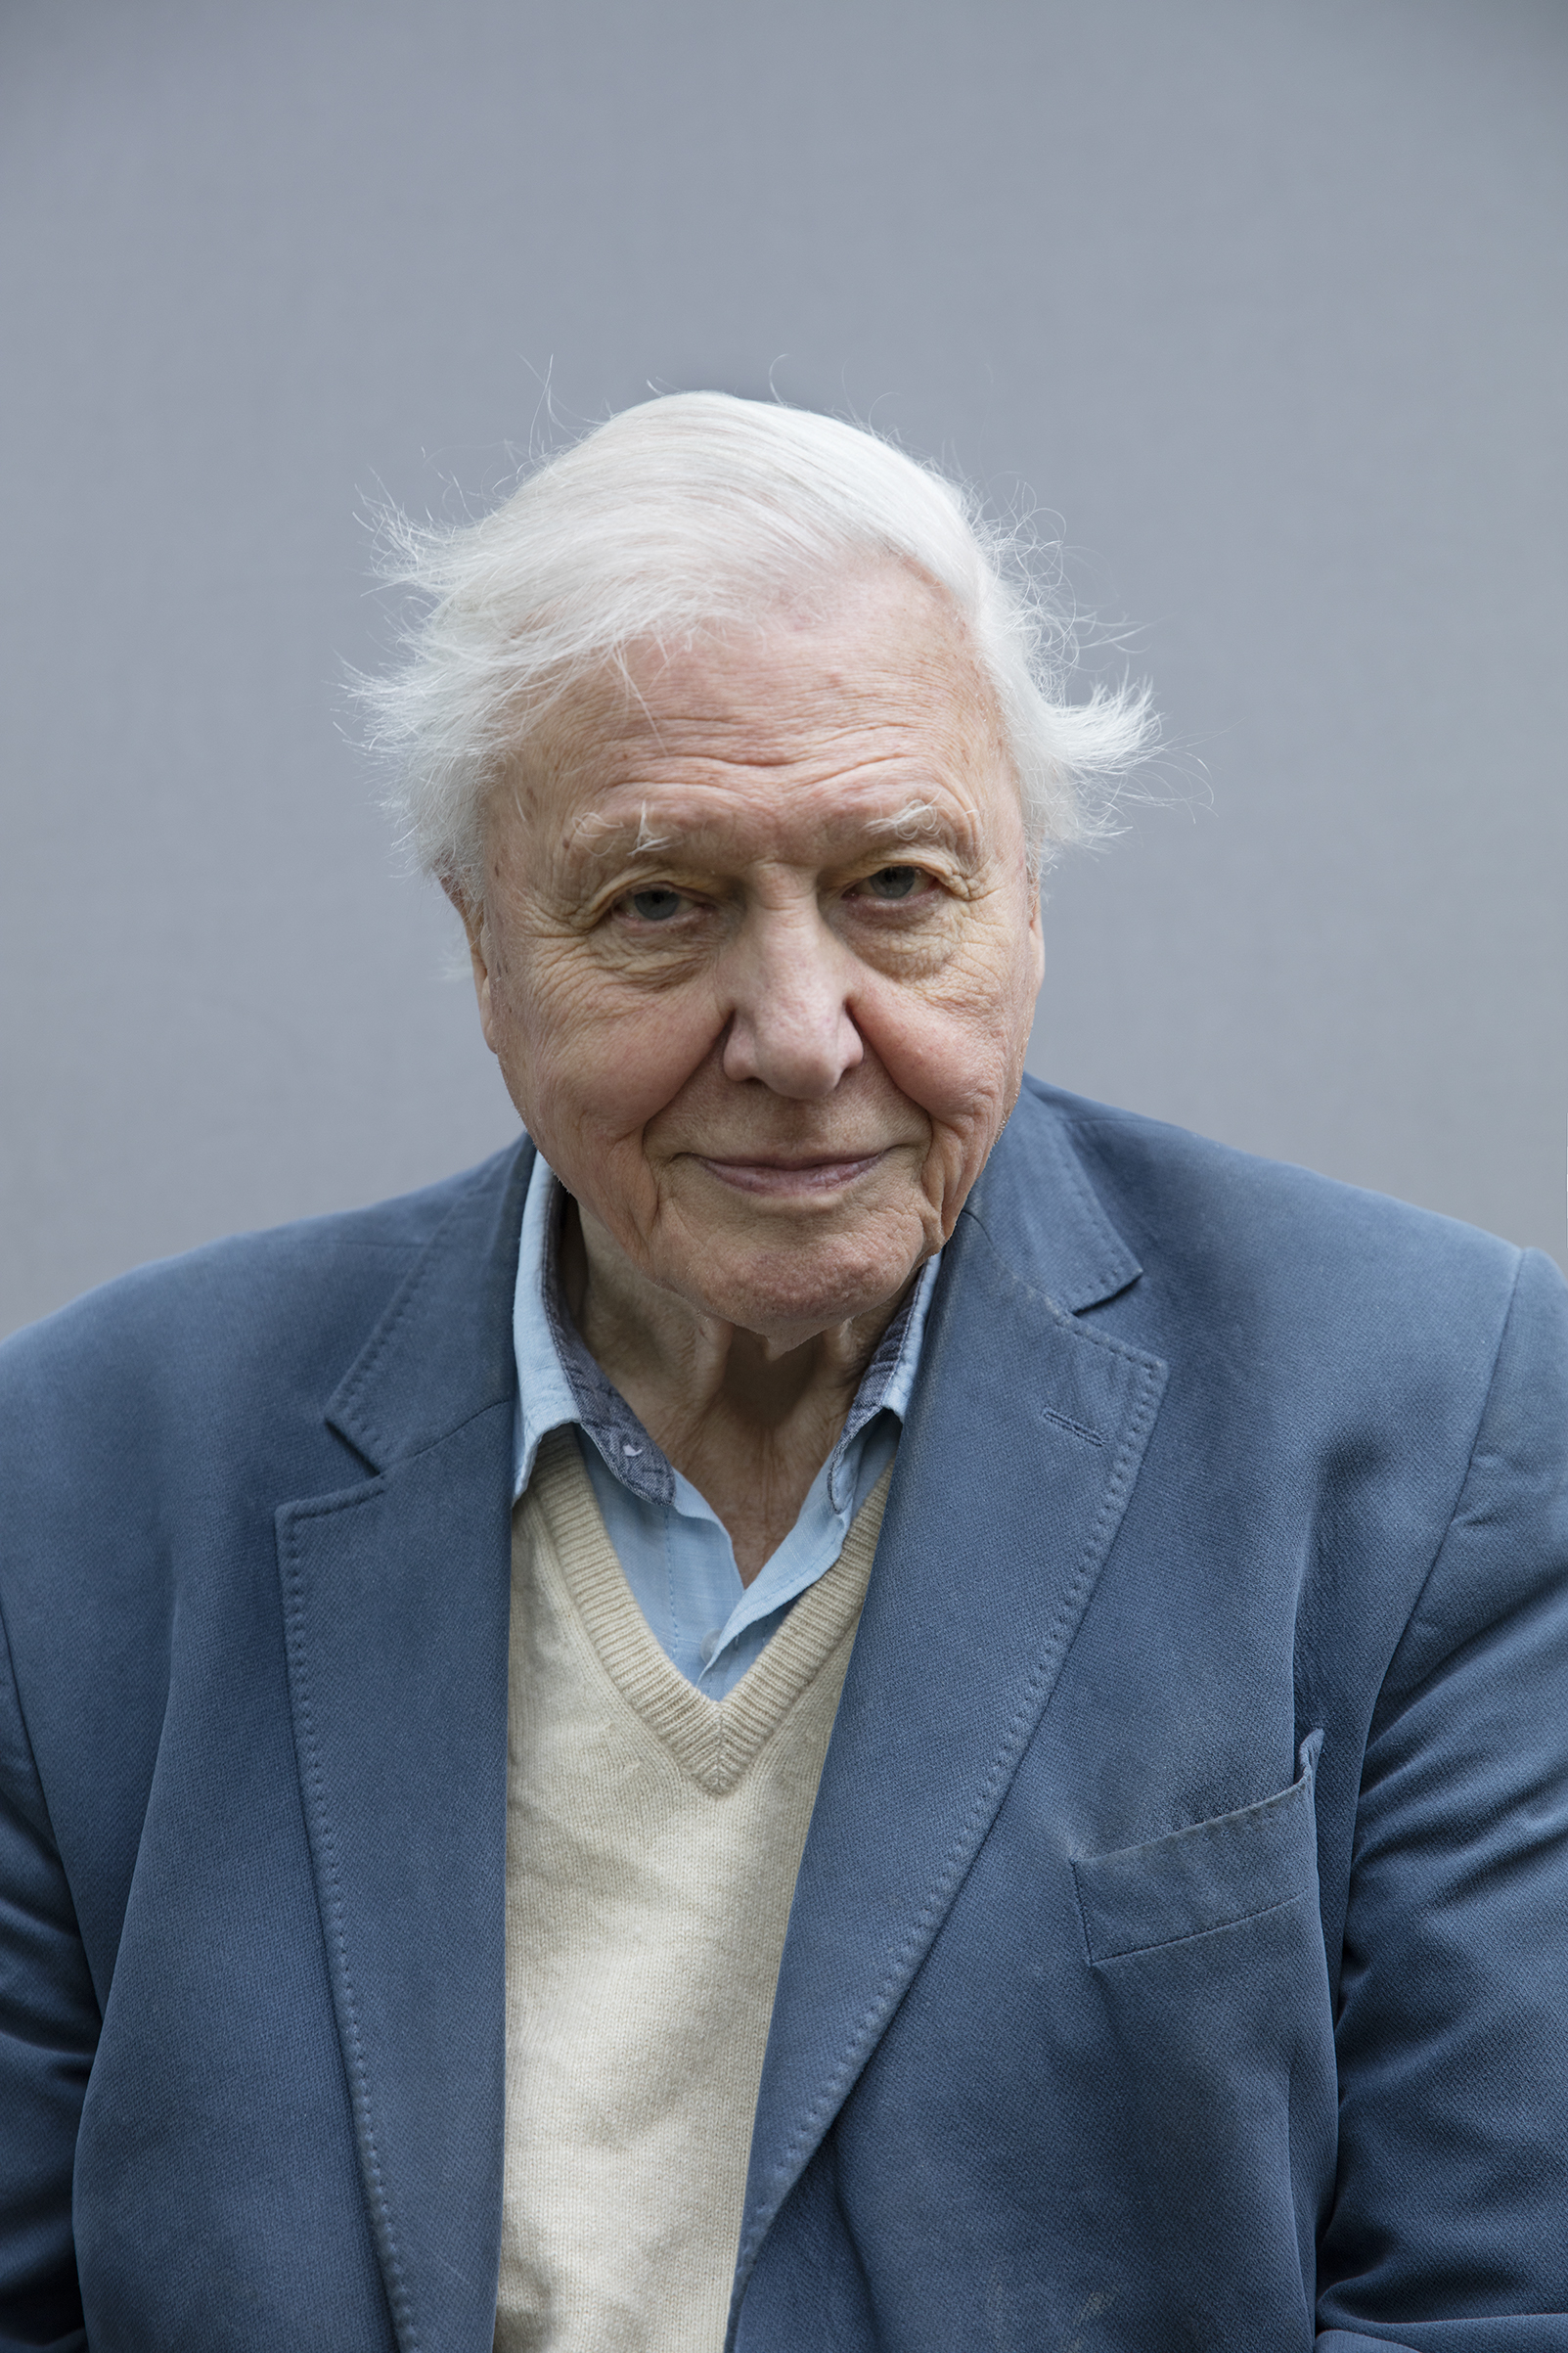 David Attenborough Voice For Our Planet Well